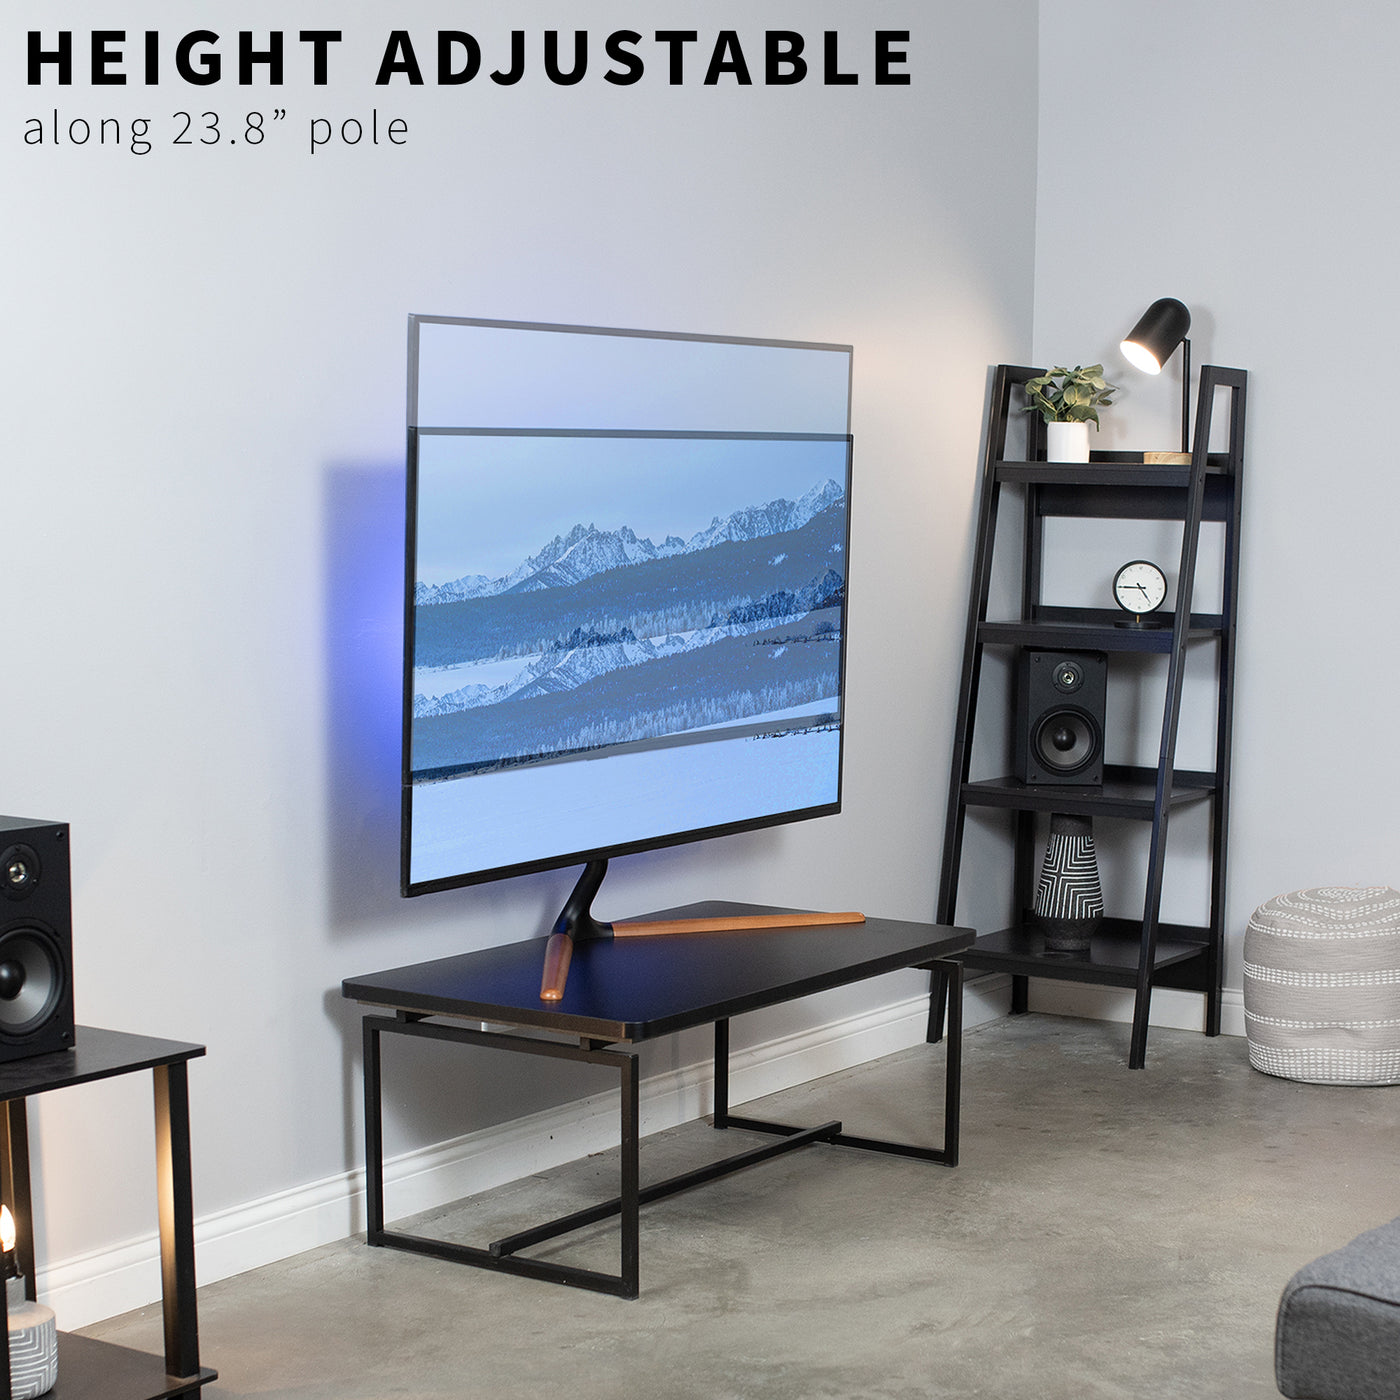 Sturdy height adjustable TV stand.